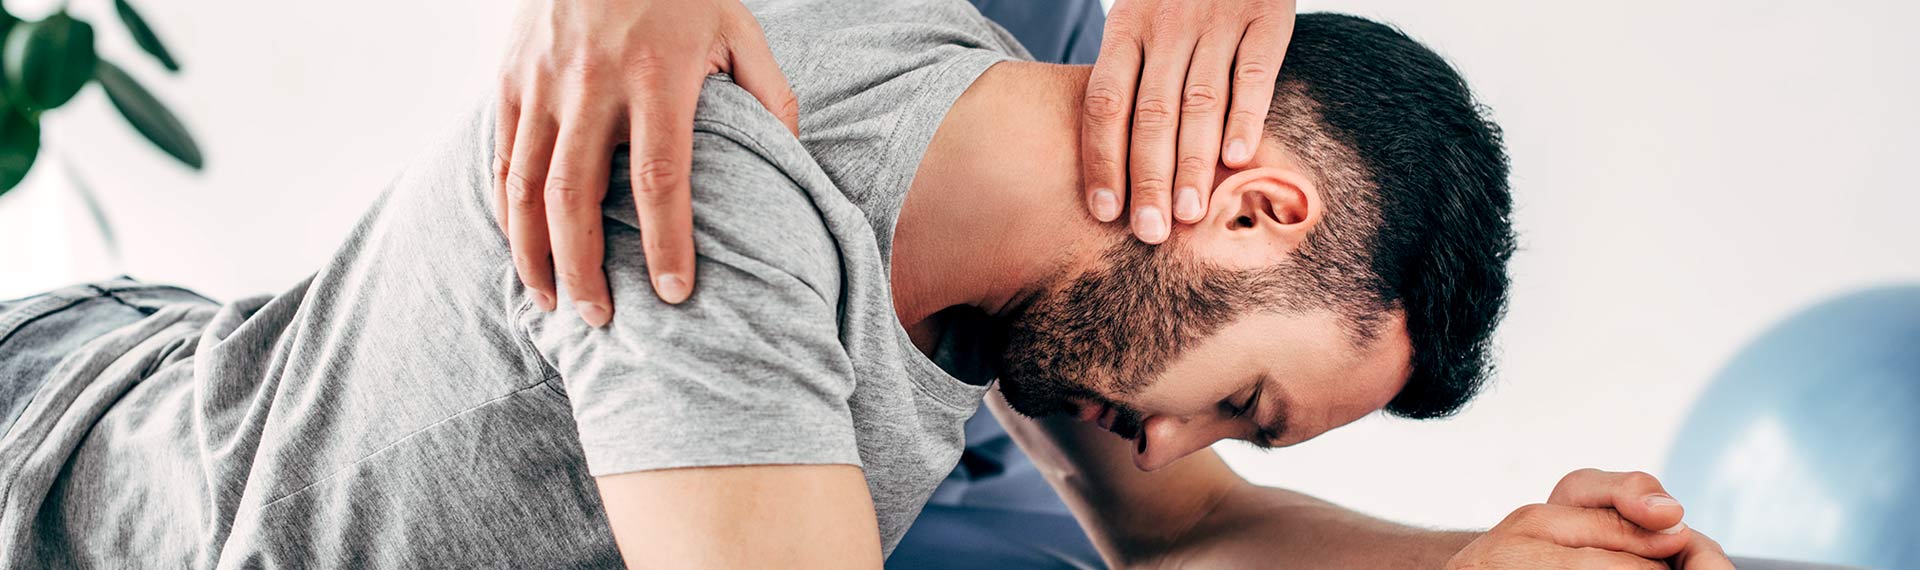 Cochrane Physiotherapy